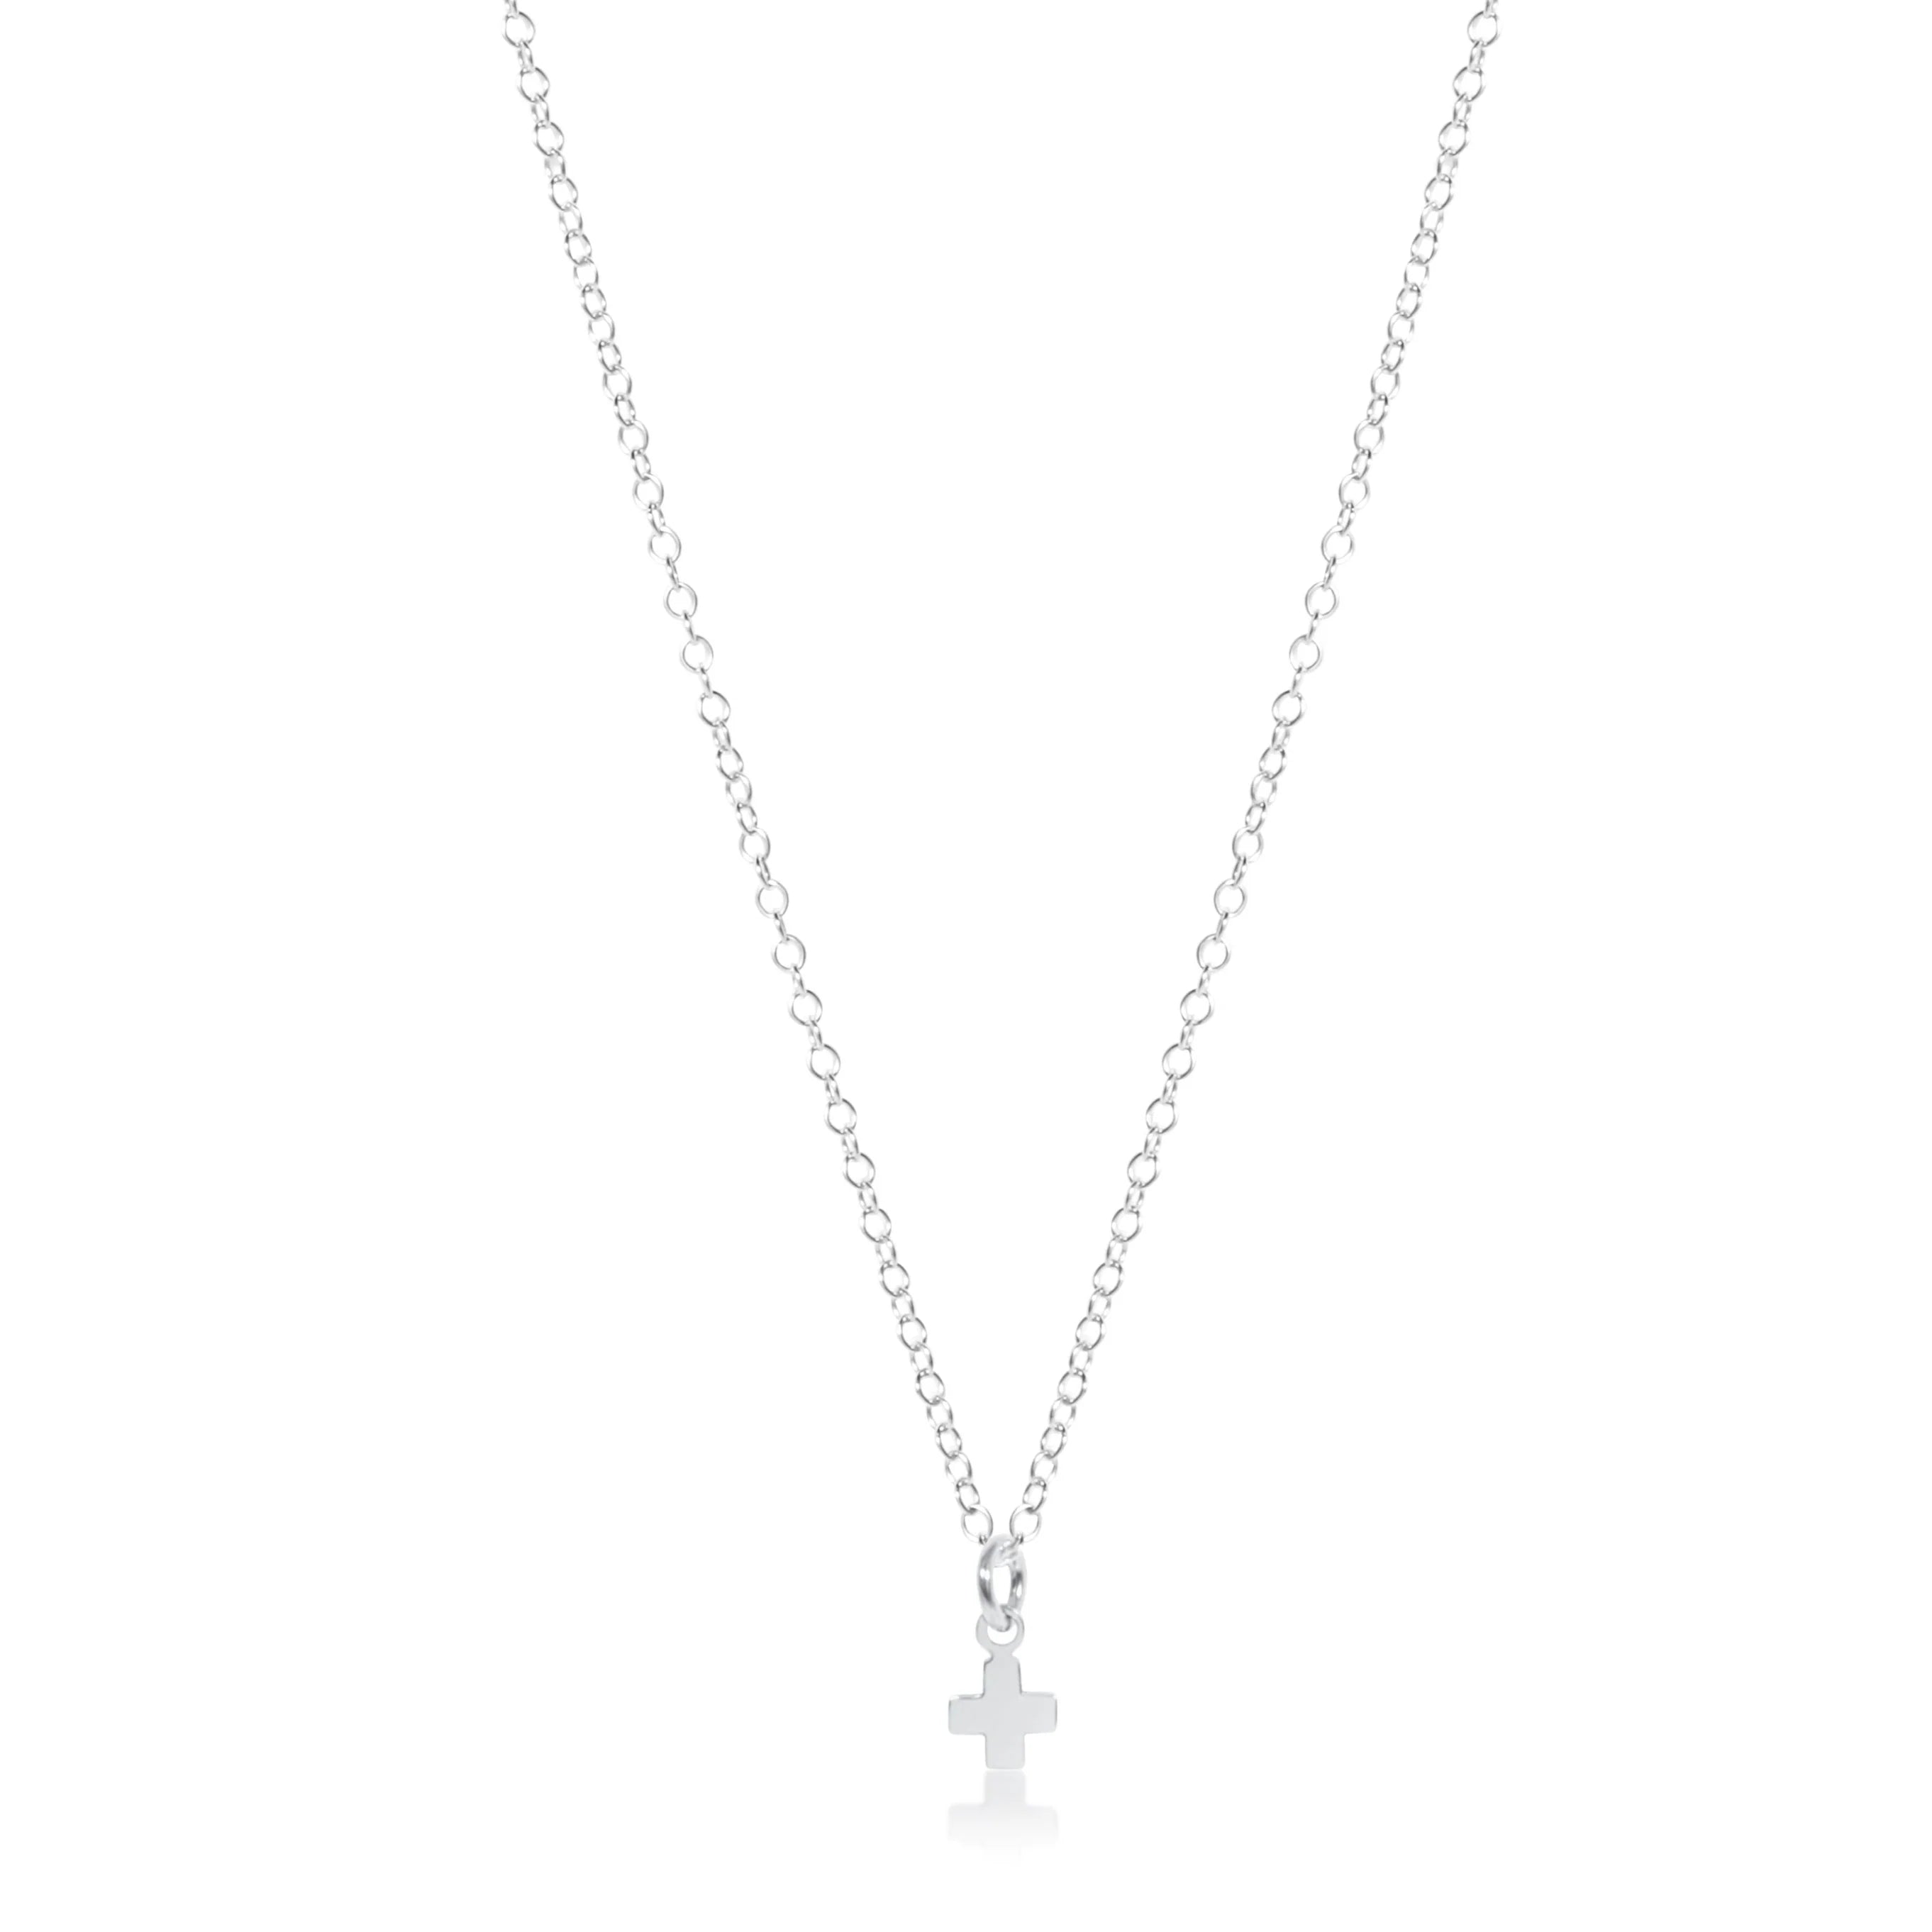 Small Sterling Silver Cross on Silver Chain Necklace